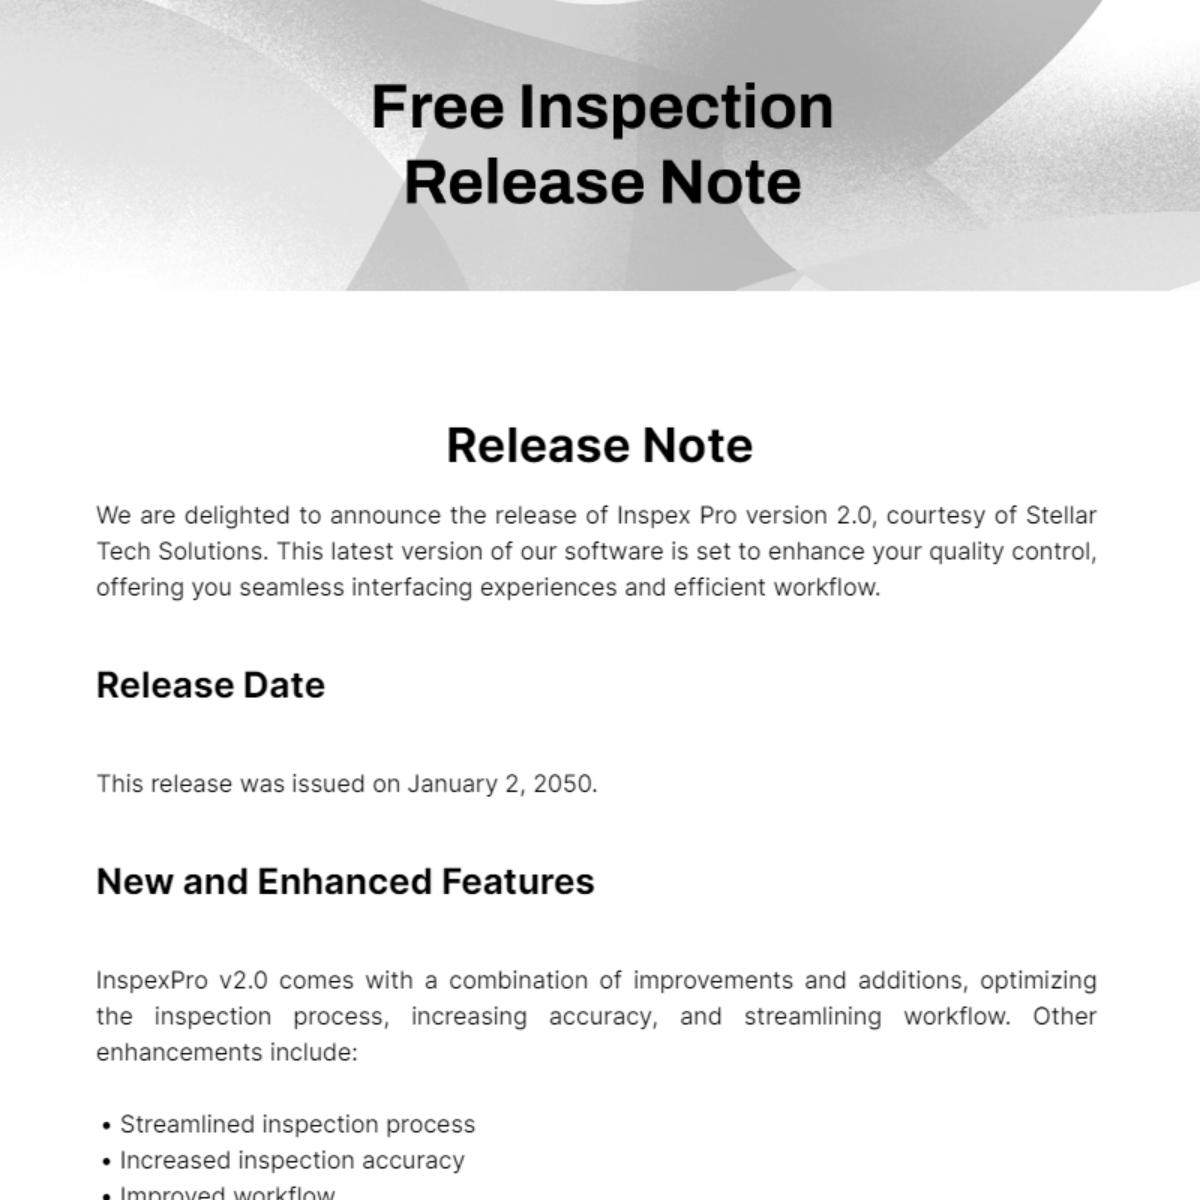 Inspection Release Note Template